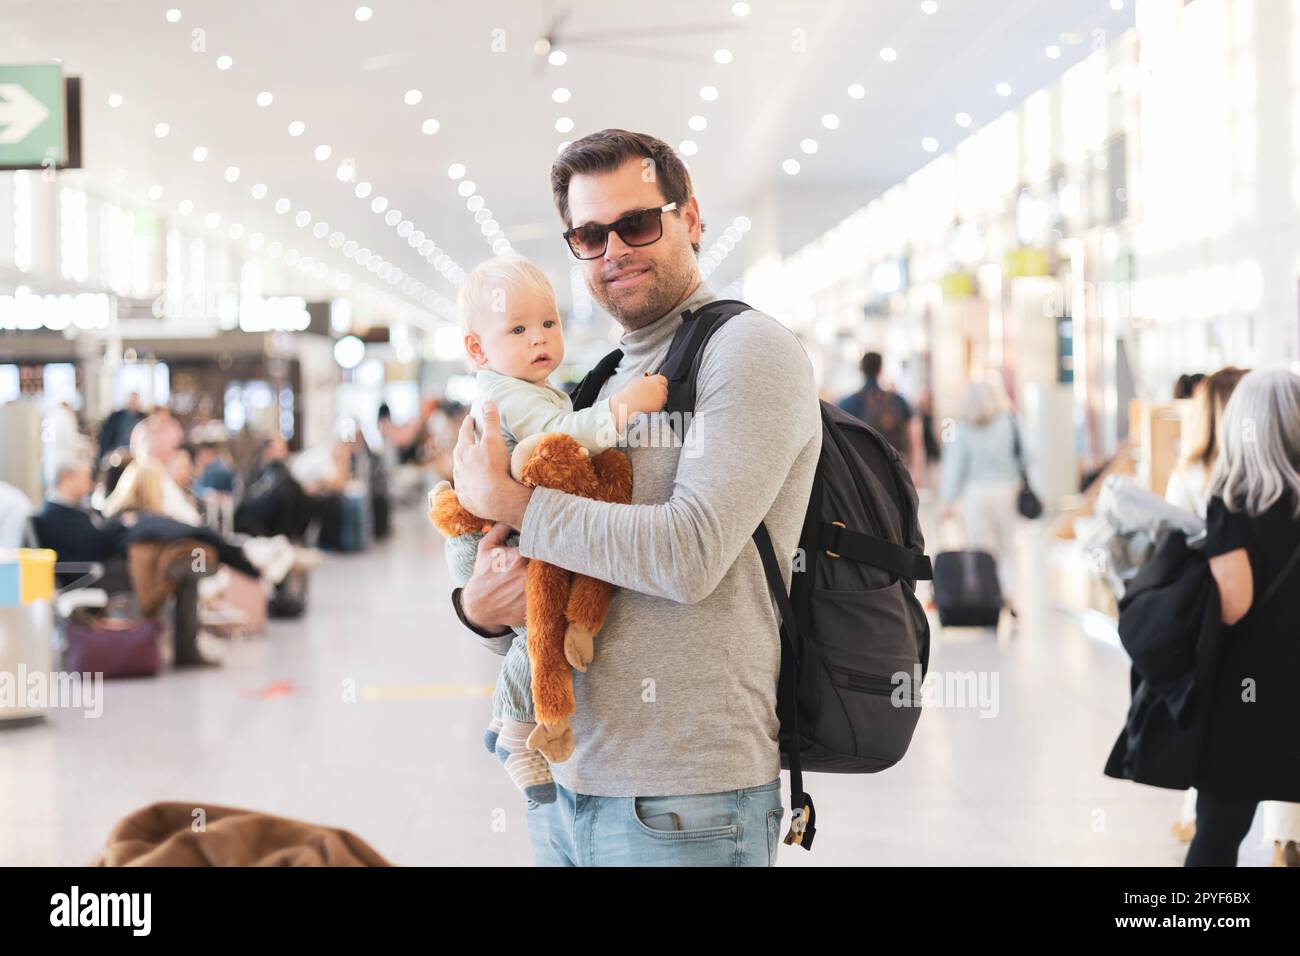 Father traveling with child, holding his infant baby boy at airport terminal waiting to board a plane. Travel with kids concept. Stock Photo